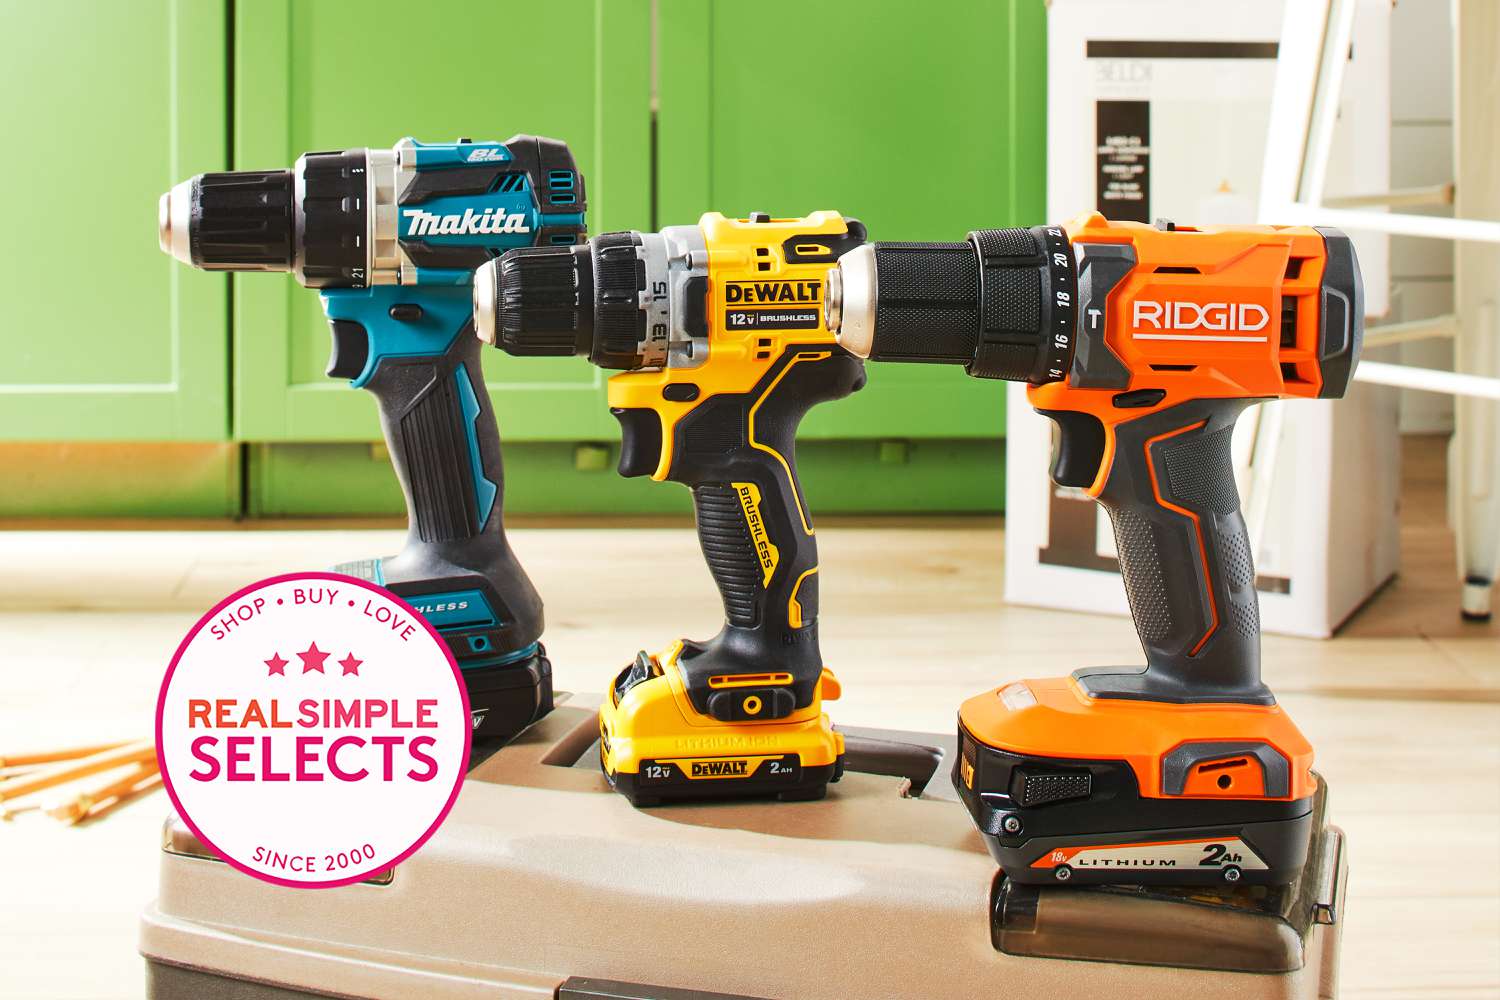 Which Cordless Tools are Recommended for Compact And Tight Spaces?